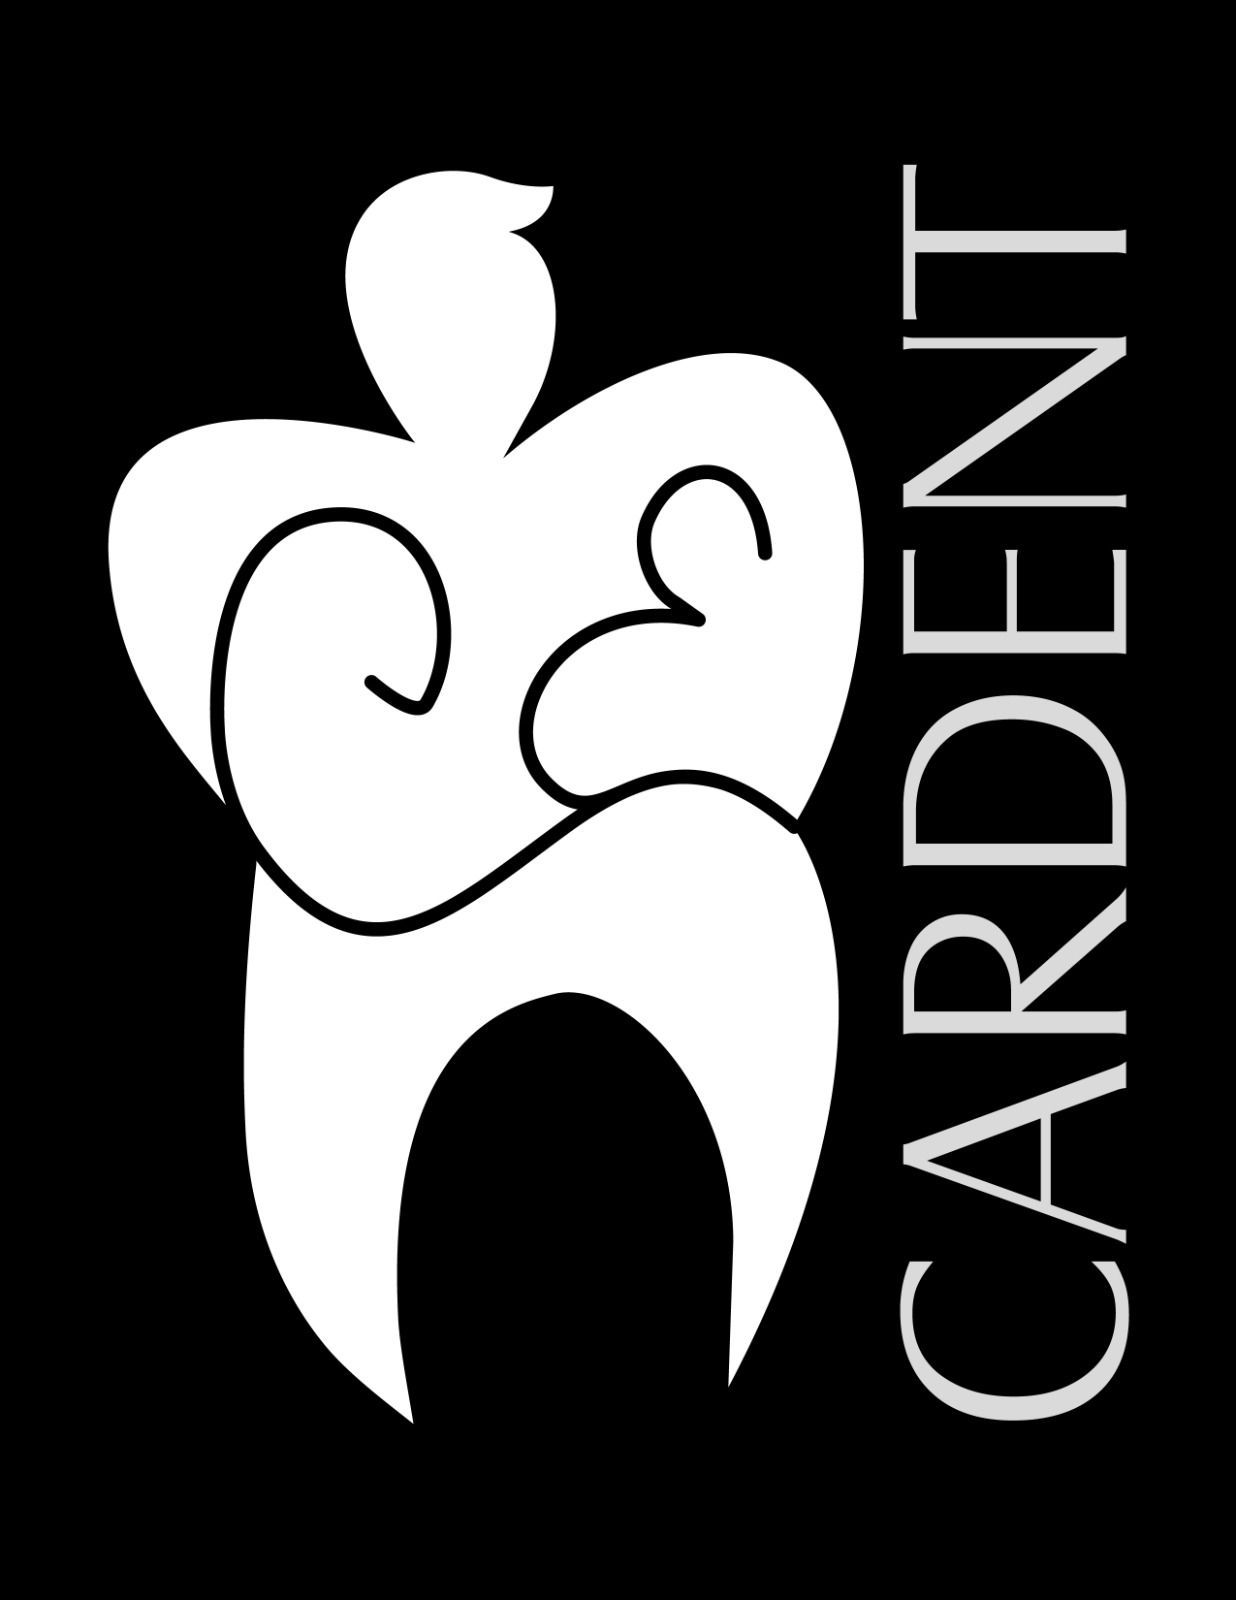 Cardent